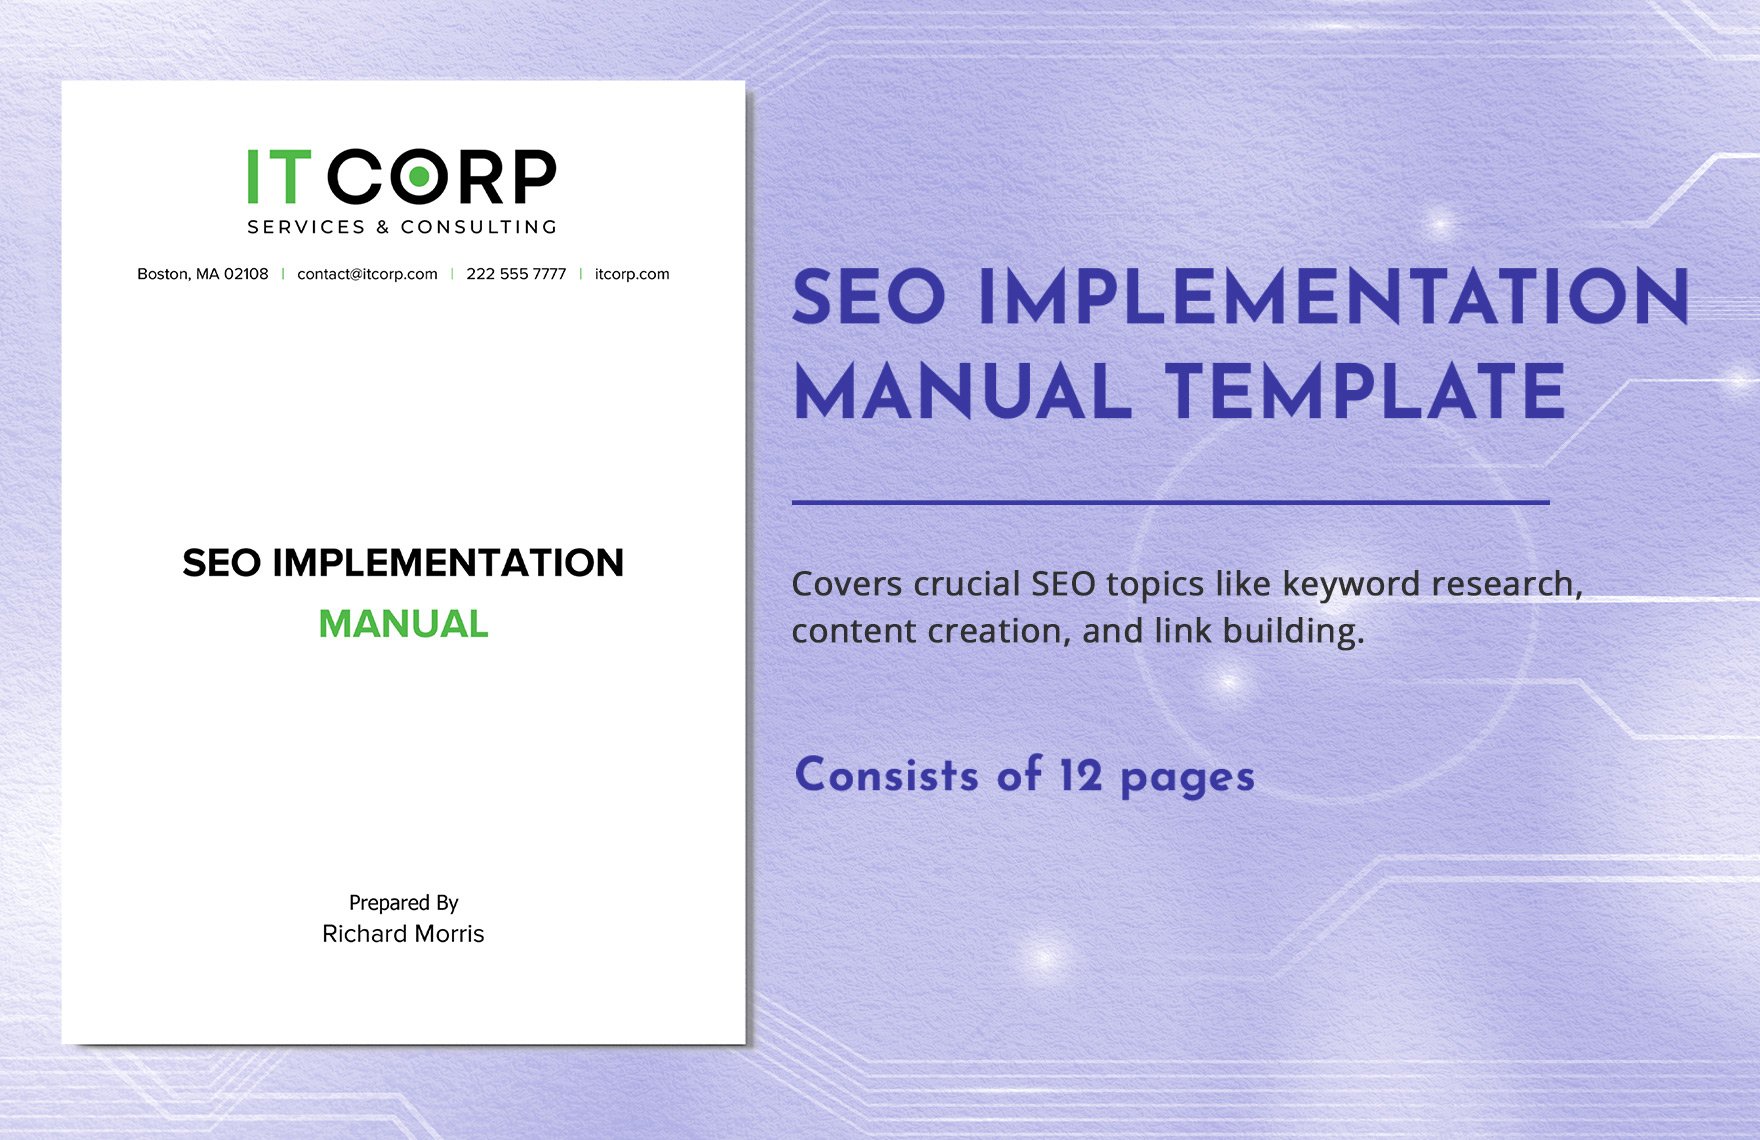 SEO Implementation Manual Template in Word, Google Docs, PDF